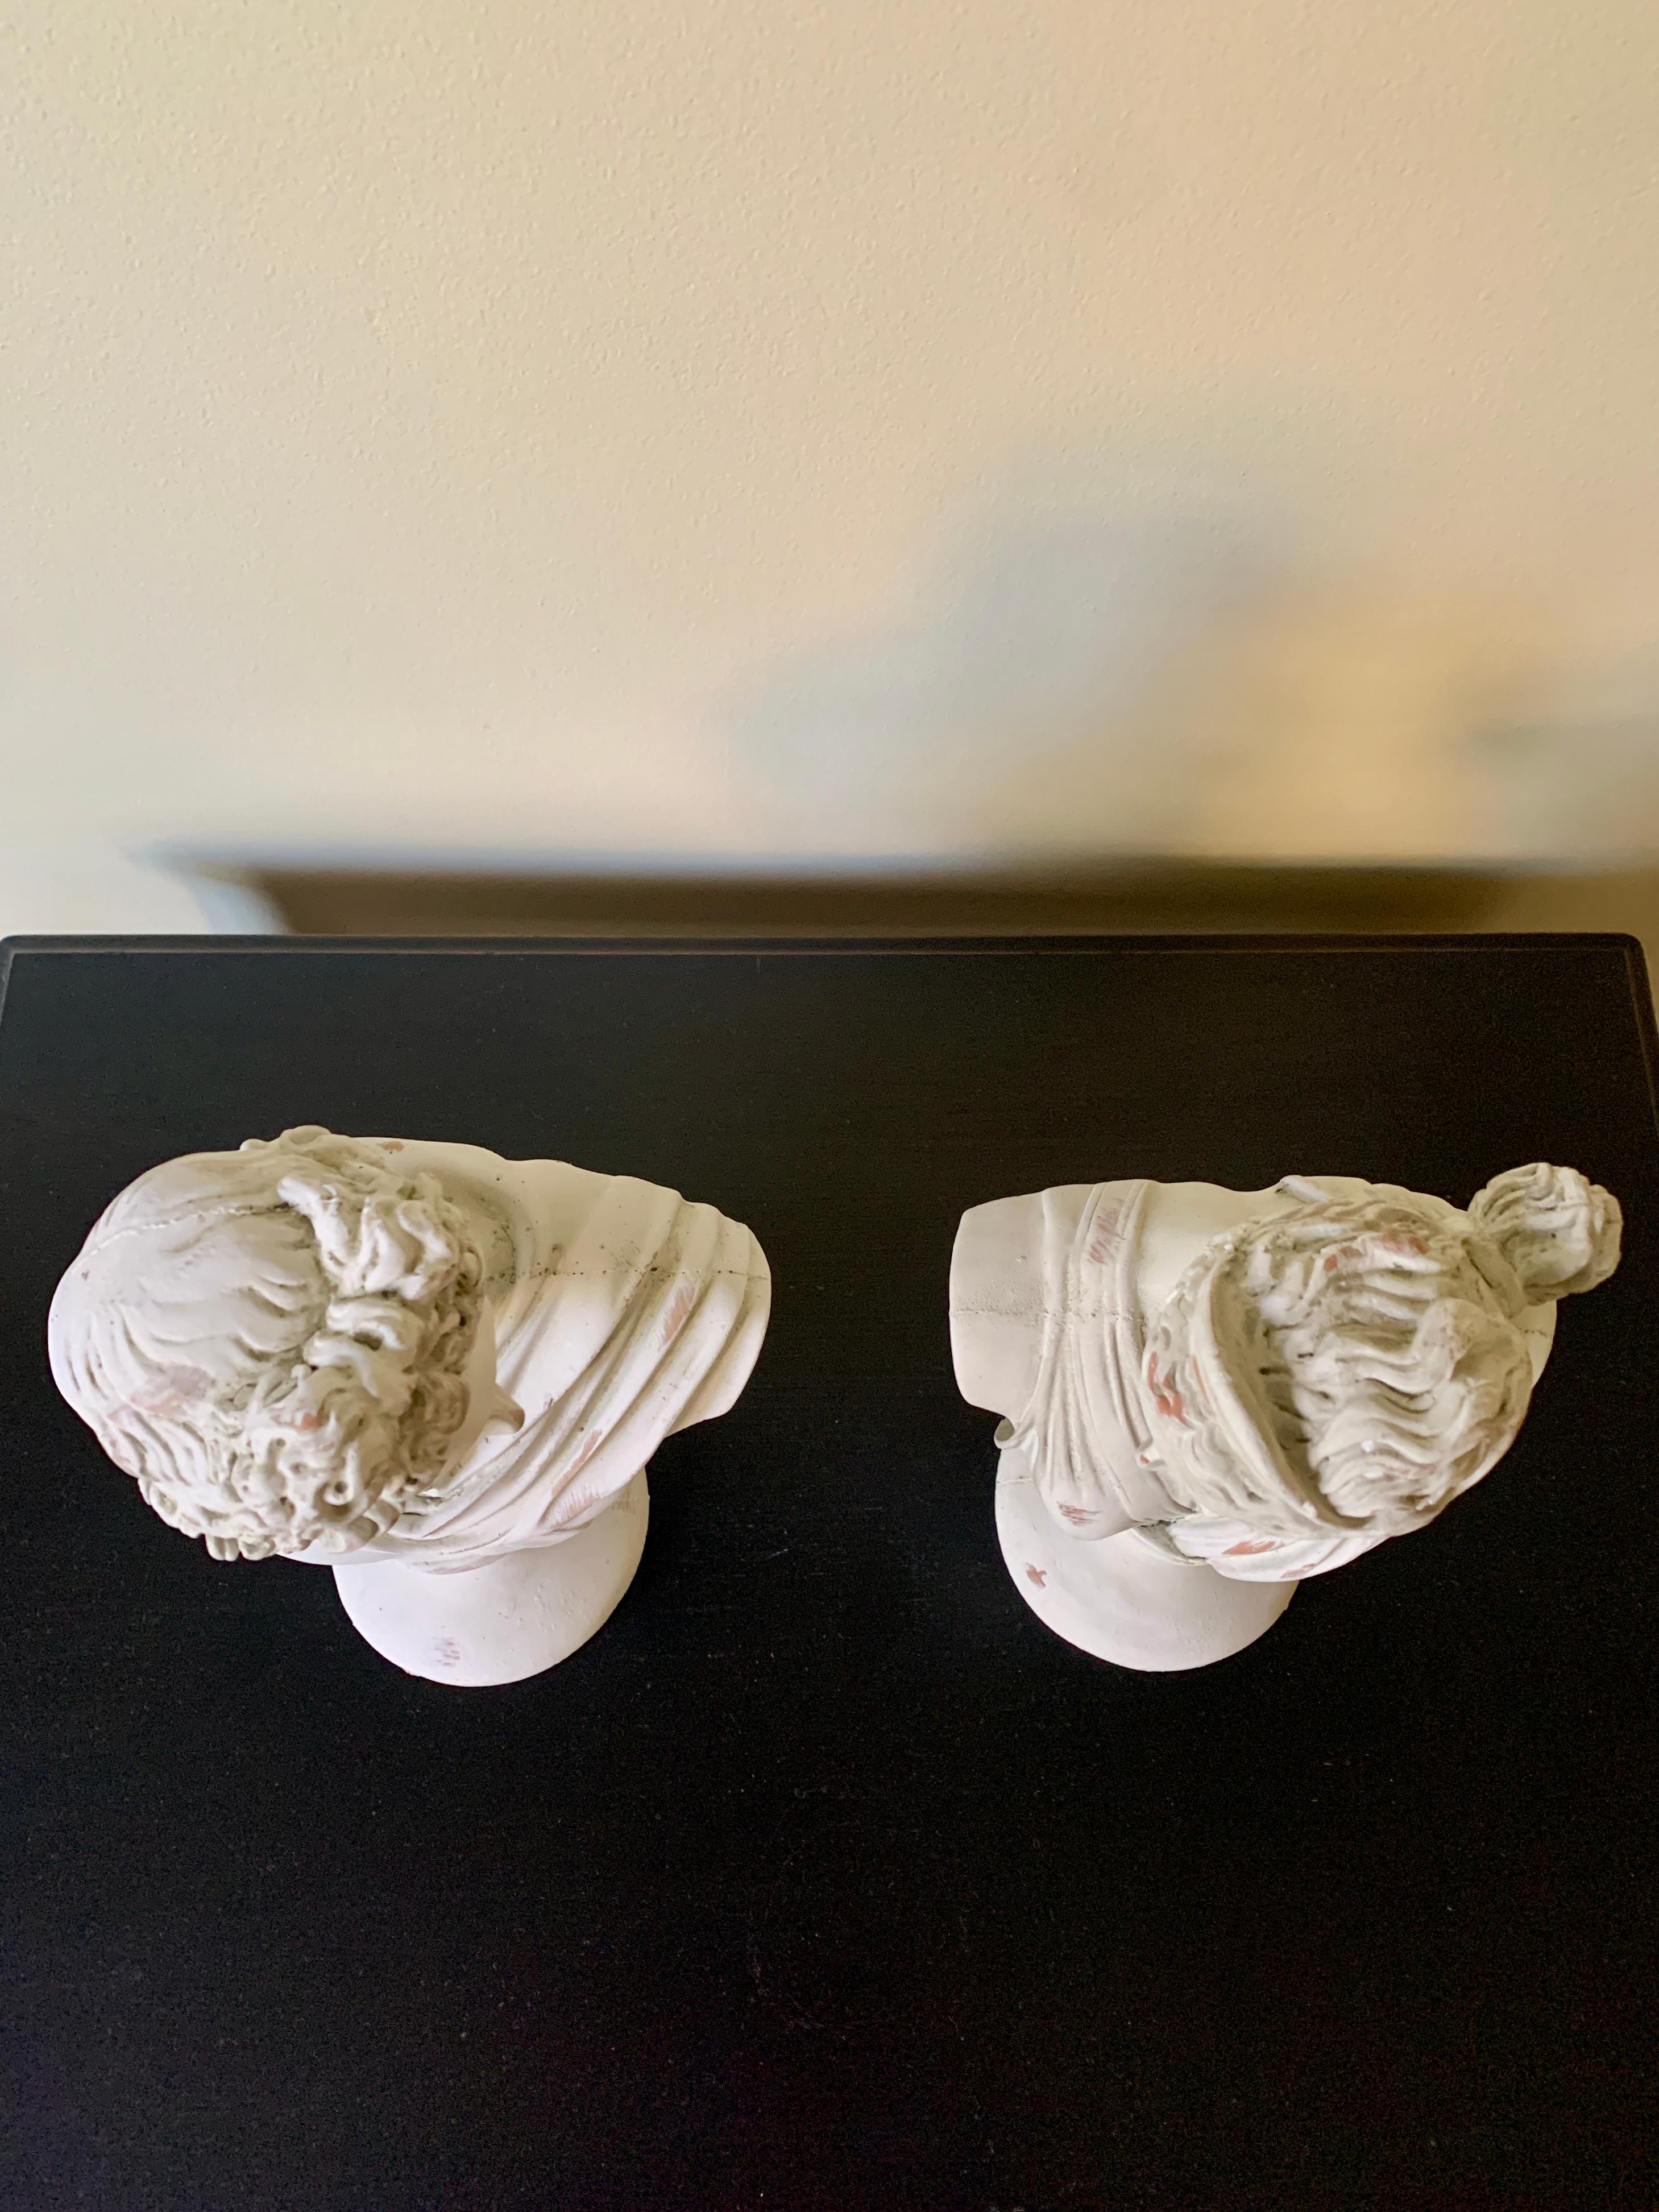 Neoclassical Plaster Busts of Diana and Apollo Belvedere Sculptures, Pair For Sale 3